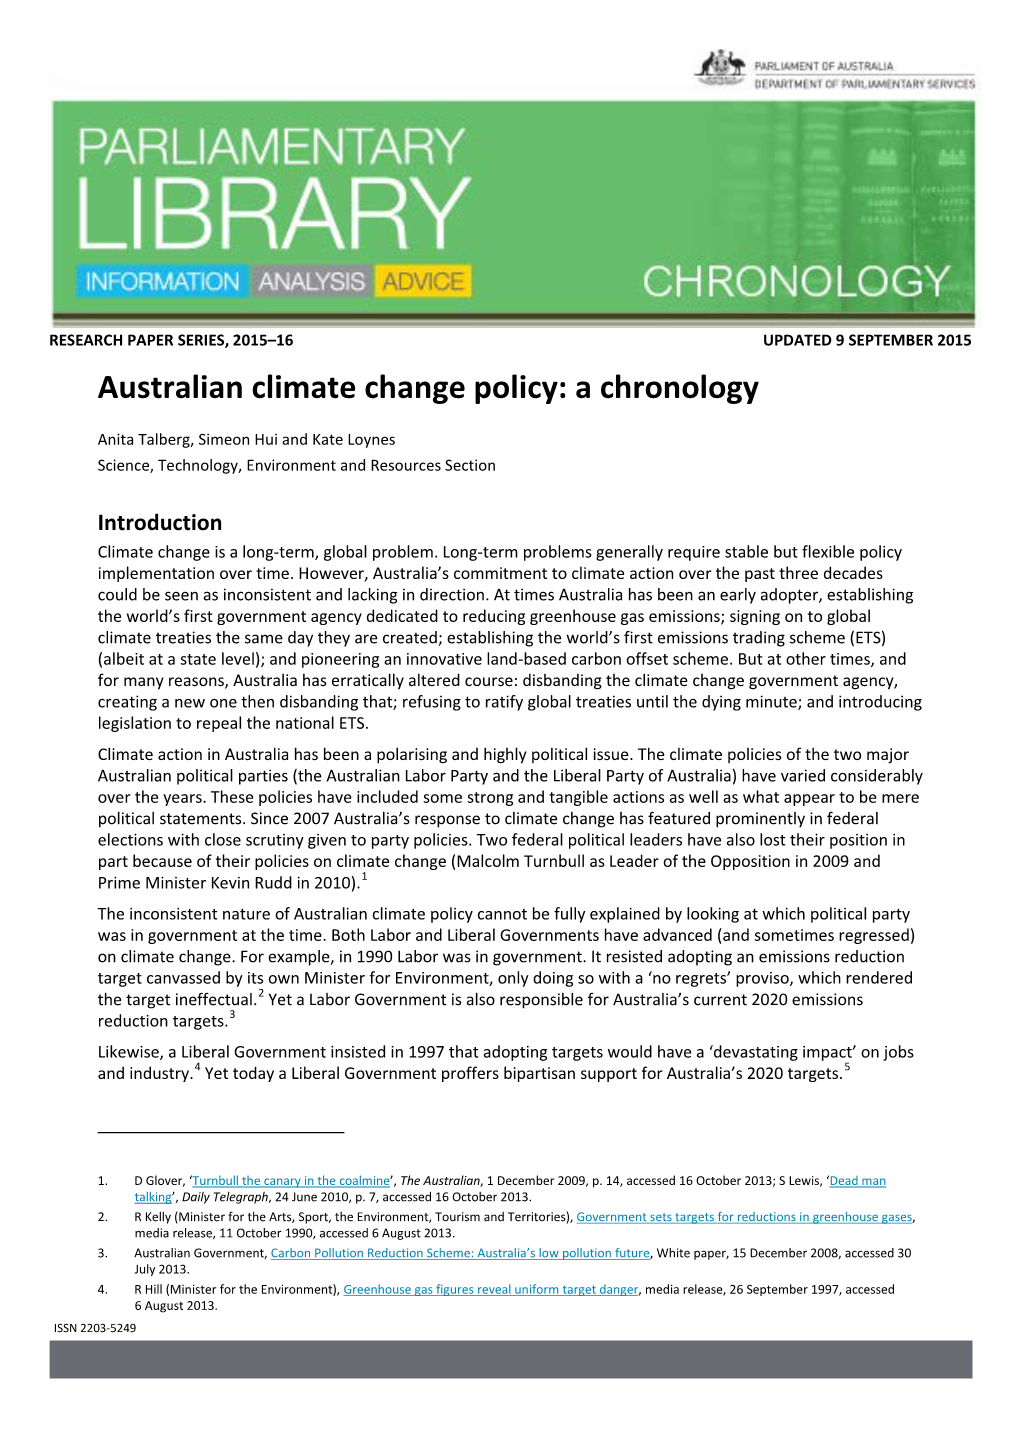 Australian Climate Change Policy: a Chronology